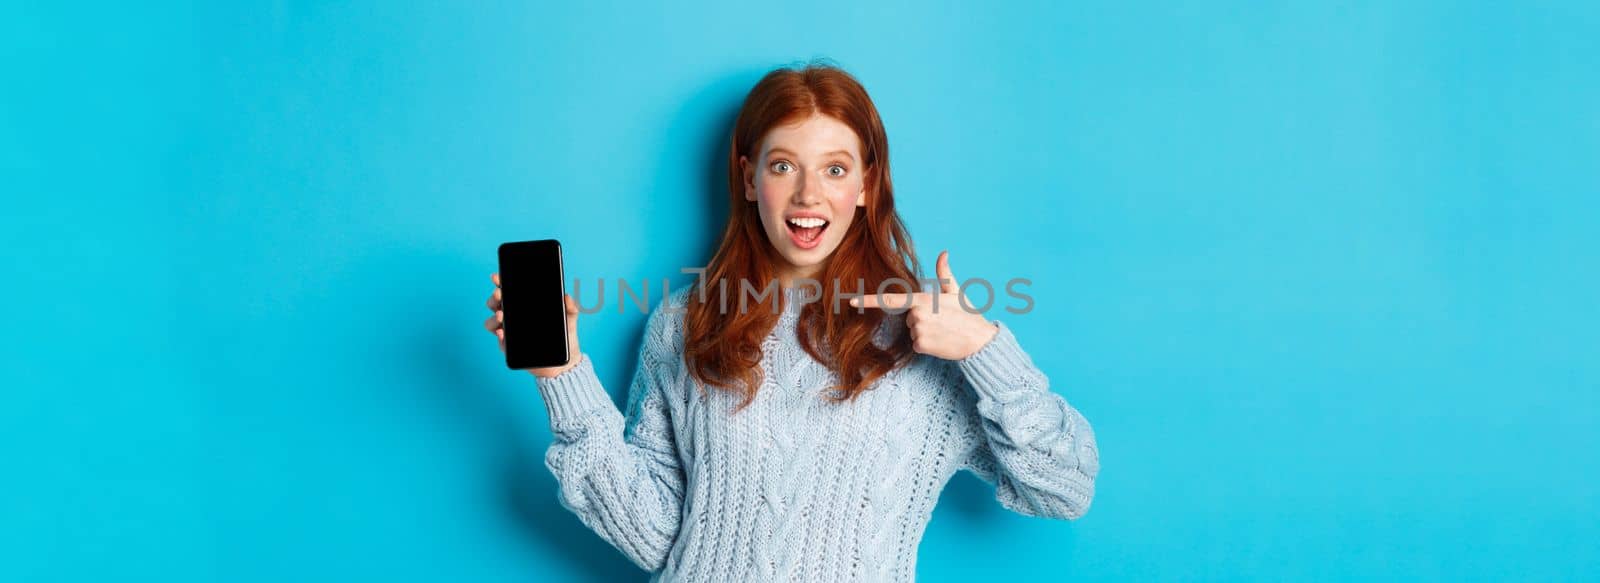 Impressed redhead girl pointing at phone screen, showing smartphone app or online offer and smiling excited, standing in sweater against blue background.